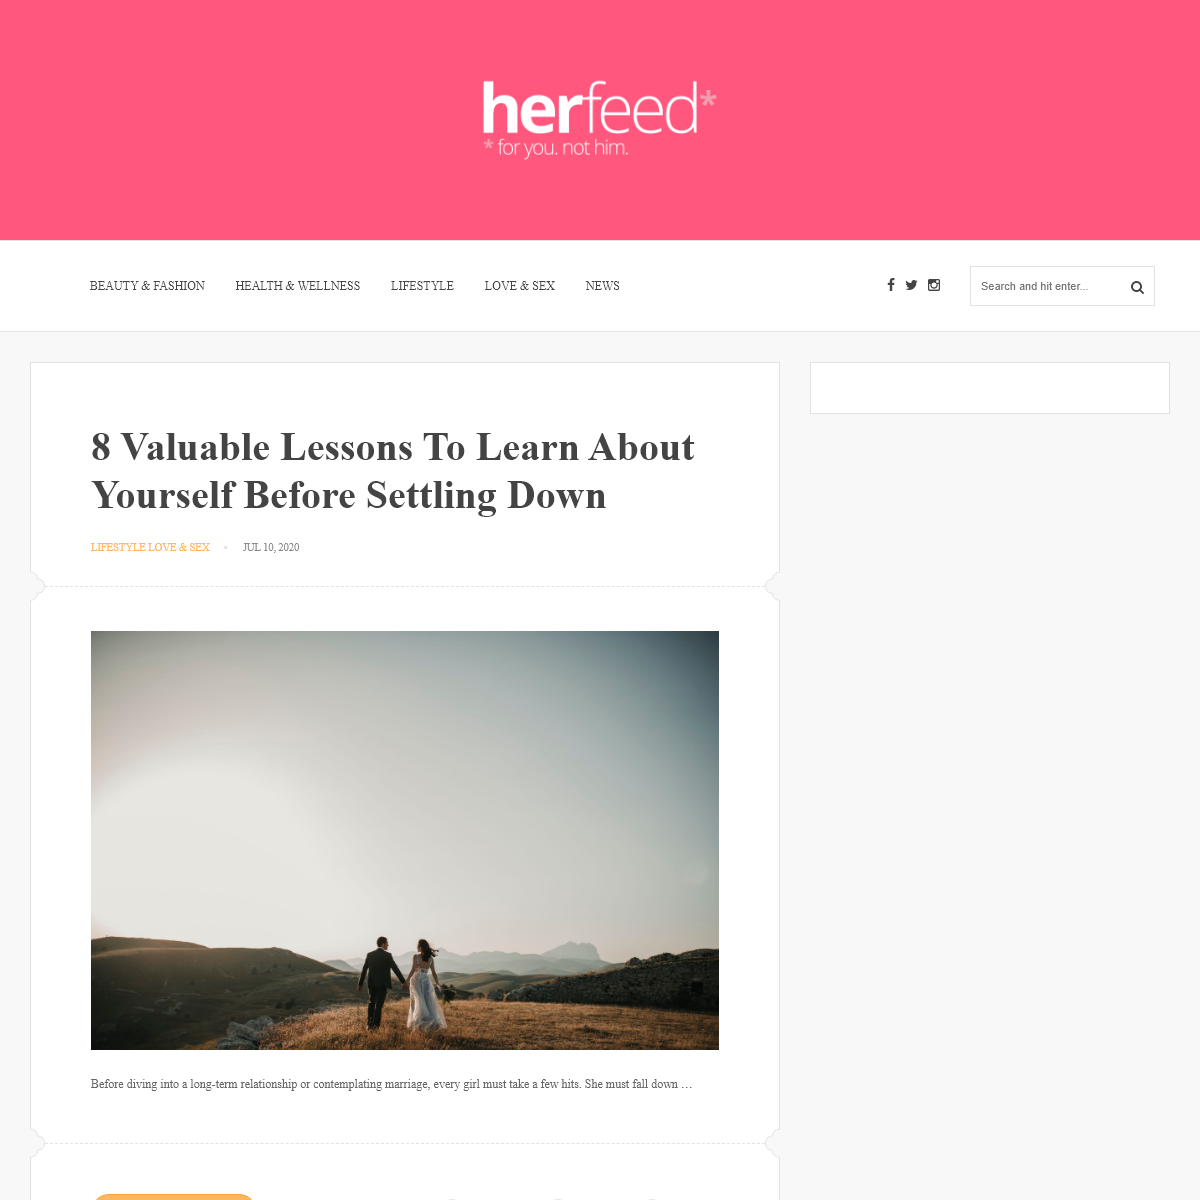 A complete backup of herfeed.com